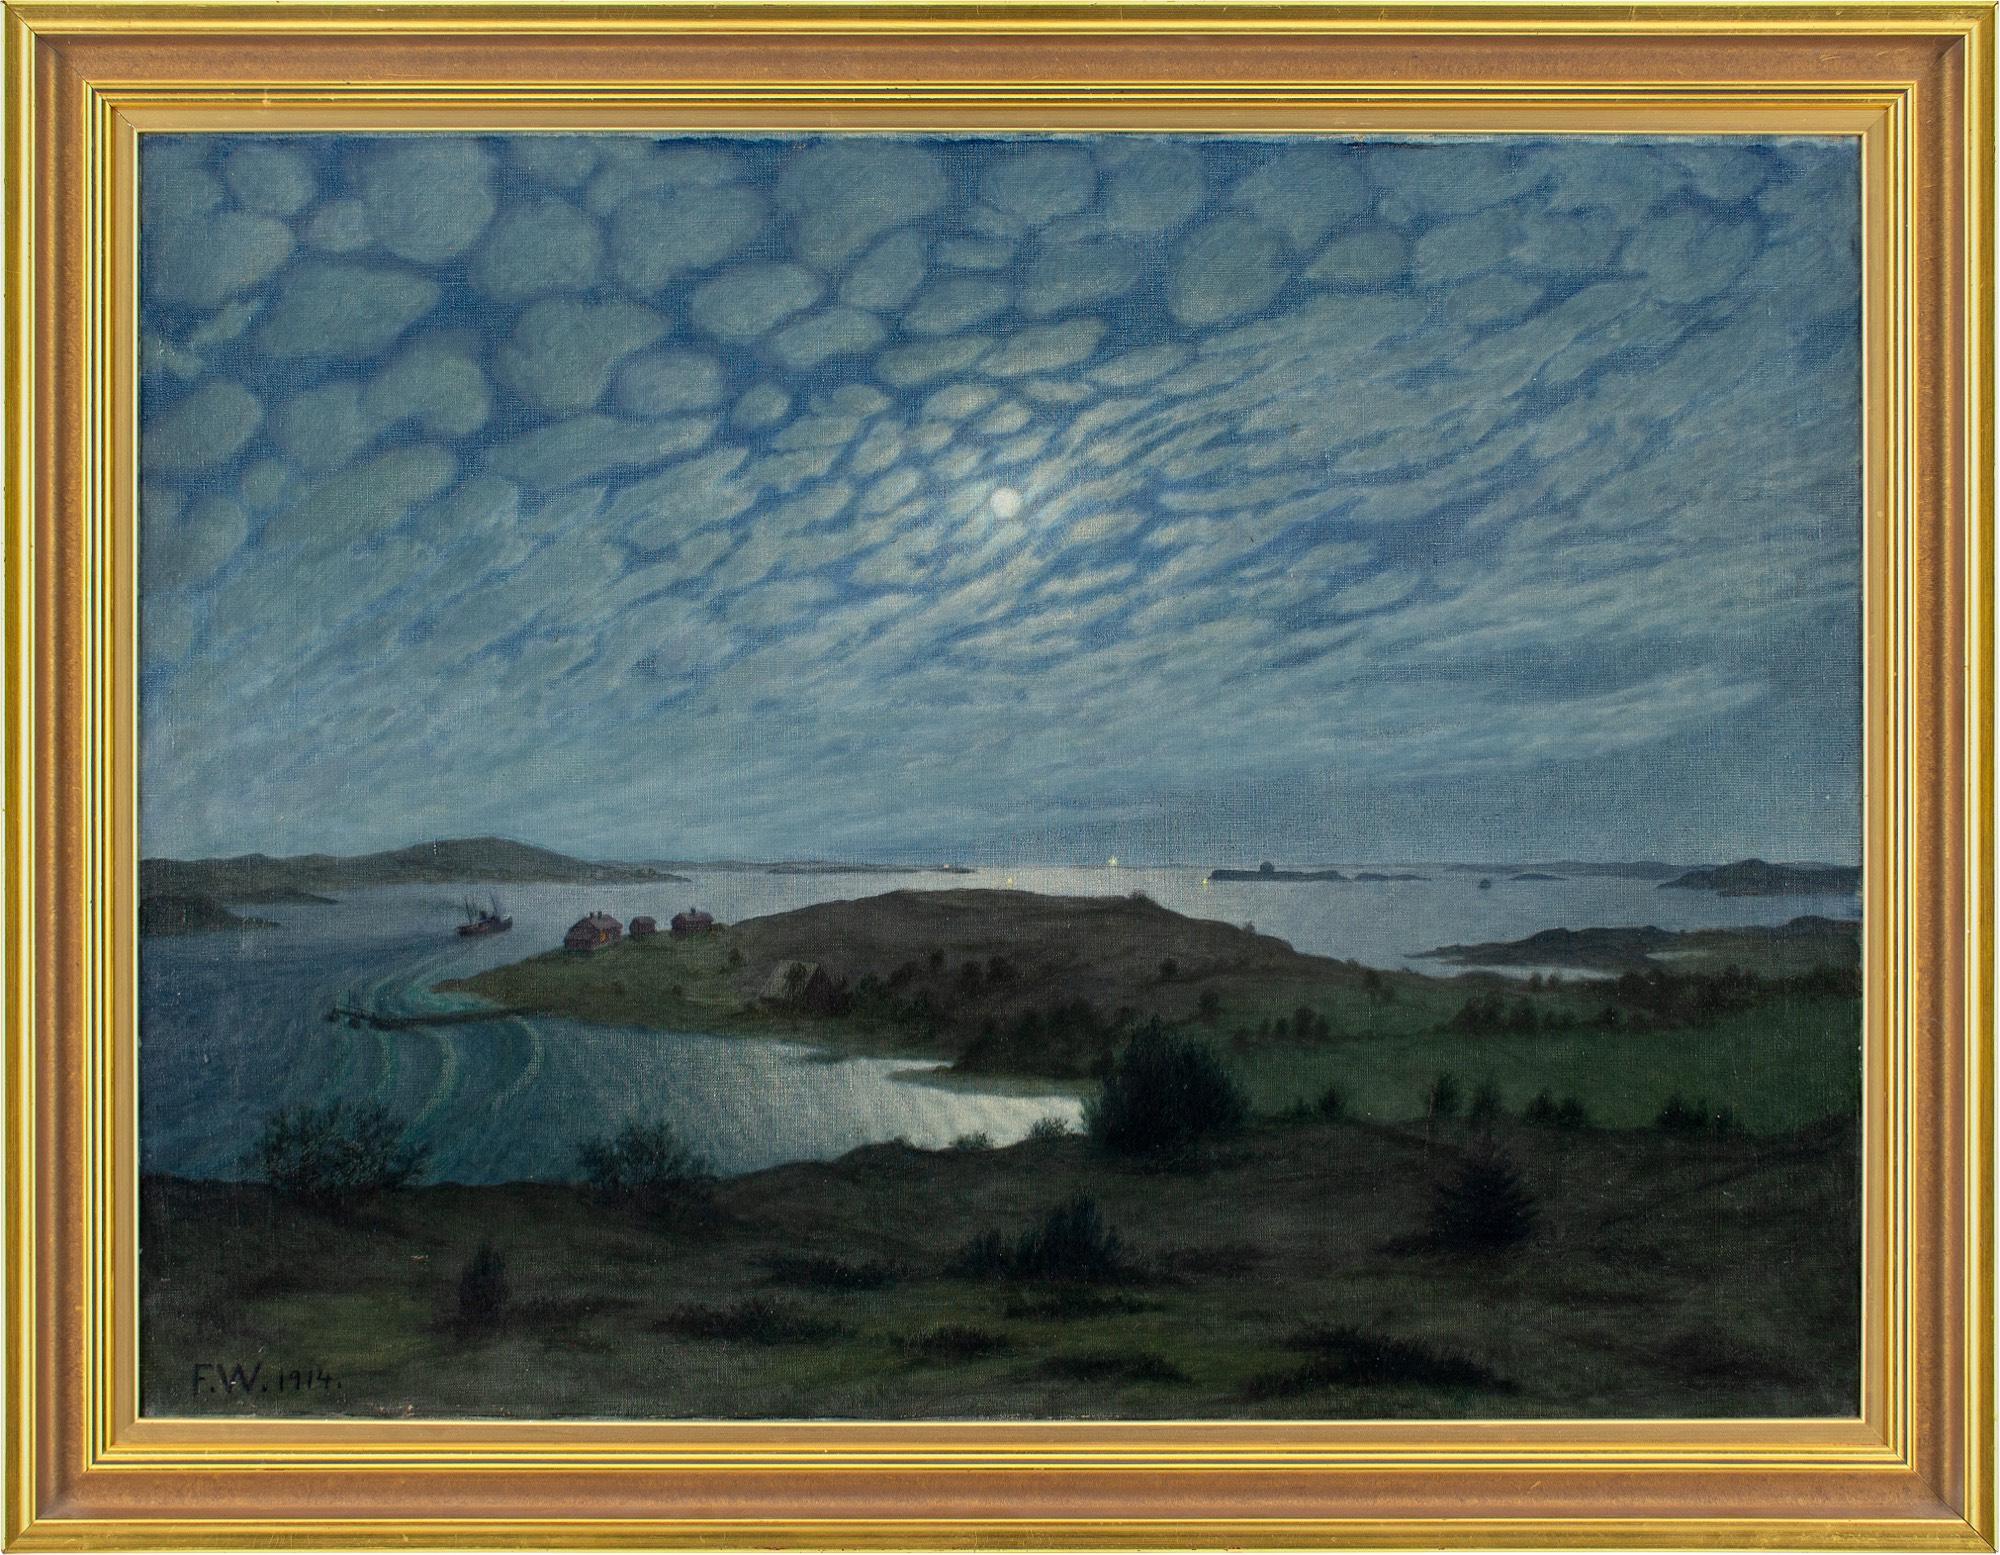 This beautiful early 20th-century oil painting by Swedish artist Filip Artur Wahlström (1885-1972) depicts a dramatic moonlit sky over Älvsborg Fortress in Gothenburg district.

Wahlström was an accomplished painter of landscapes, rural villages,